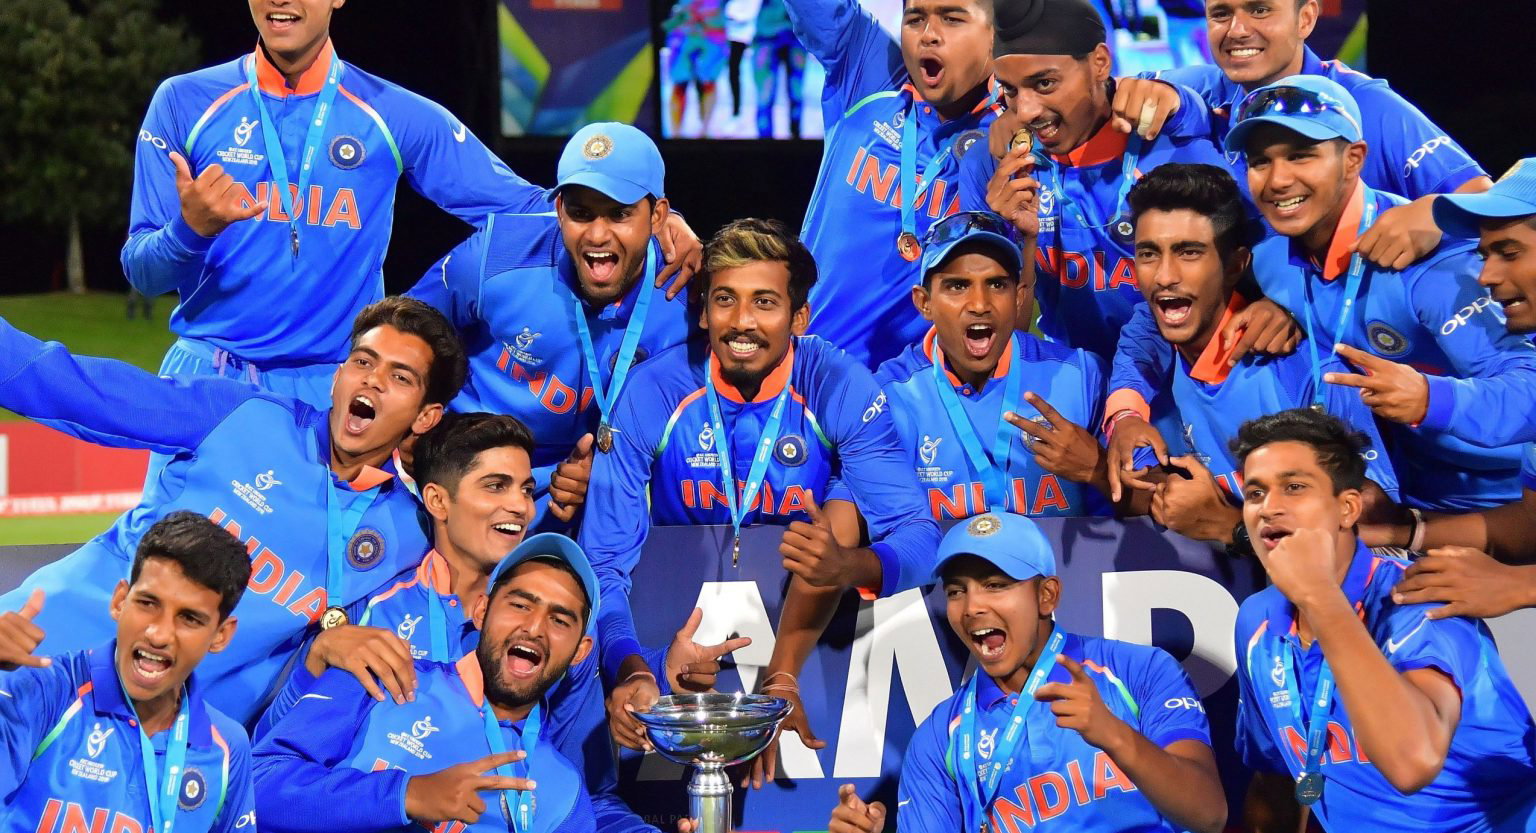 Quiz! Name Every Winner Of The U19 Cricket World Cup